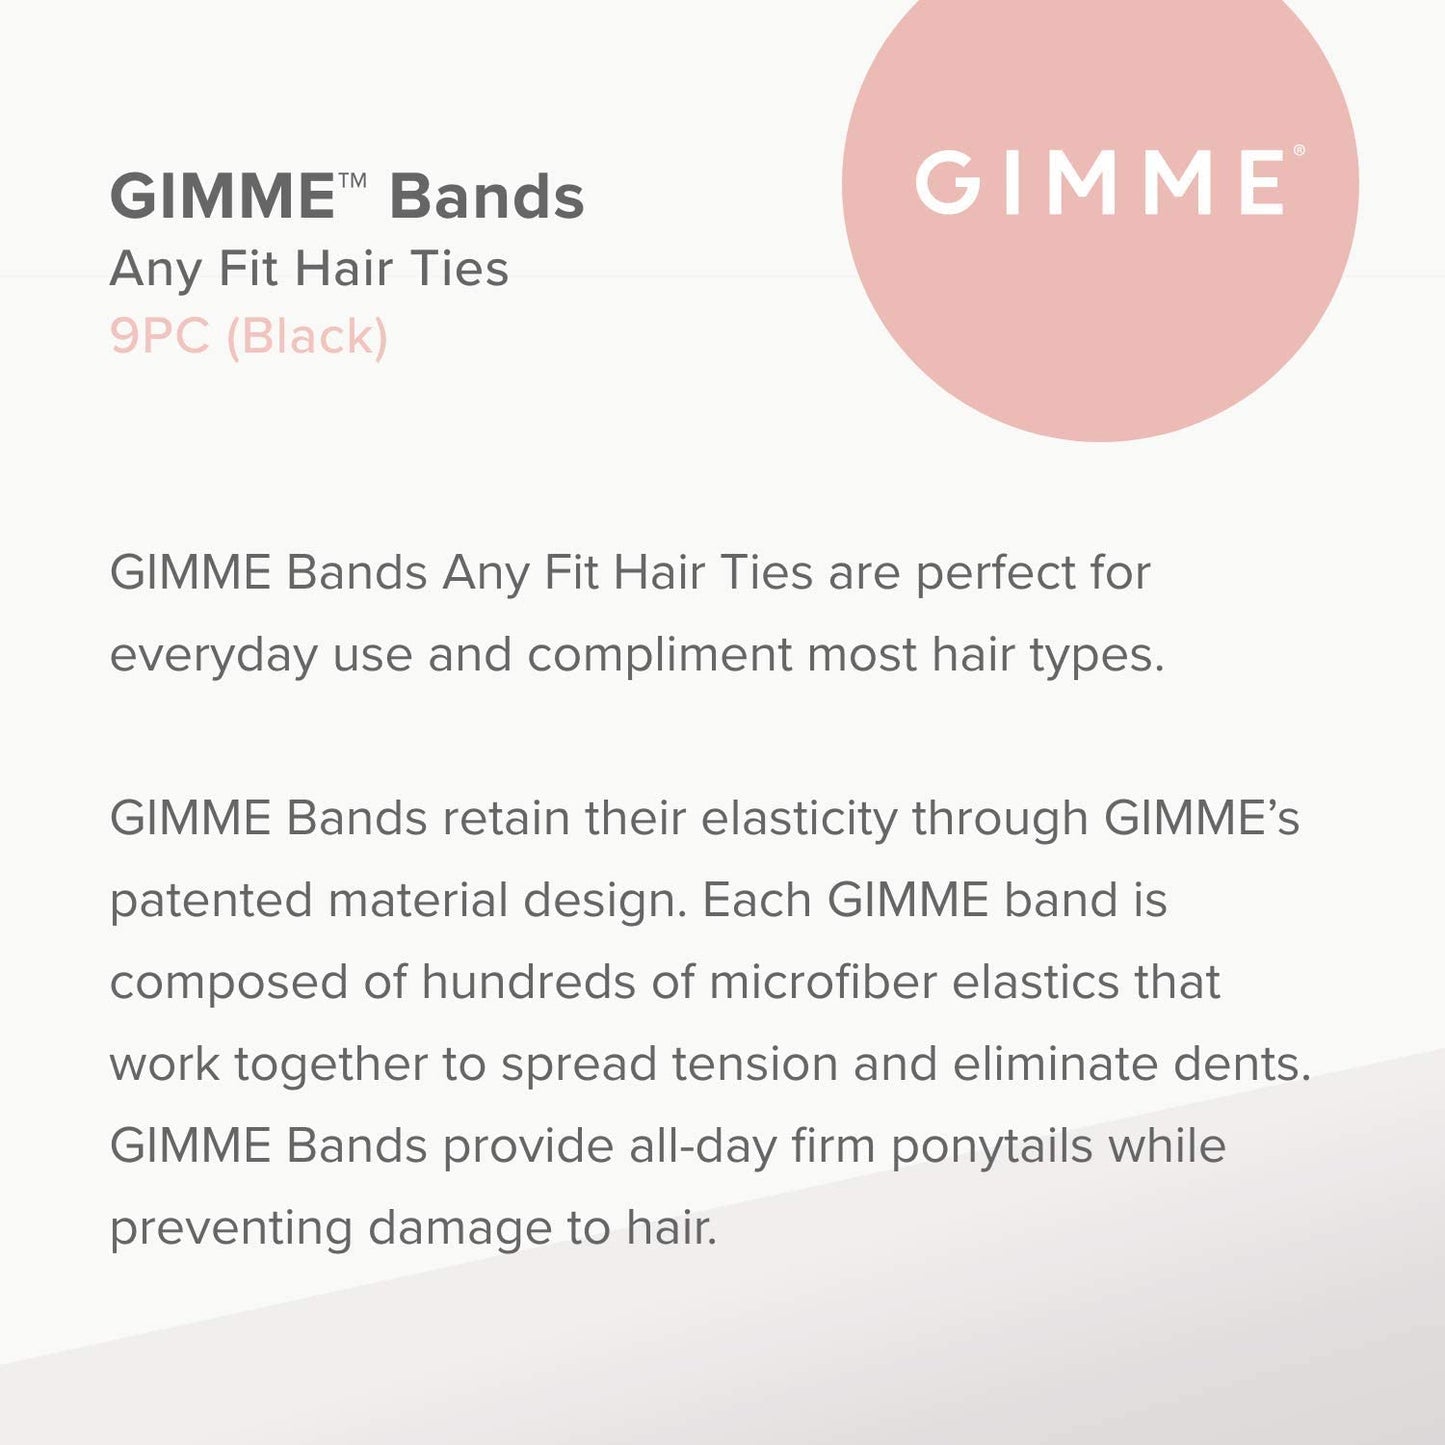 Gimme Beauty - Any Fit No Damage Hair Ties - Black Onyx - Seamless Microfiber Hair Elastic - Hair Accessories With All Day Hold - No Snagging, Dents, or Breakage Hair Tie Pack (9 Count)